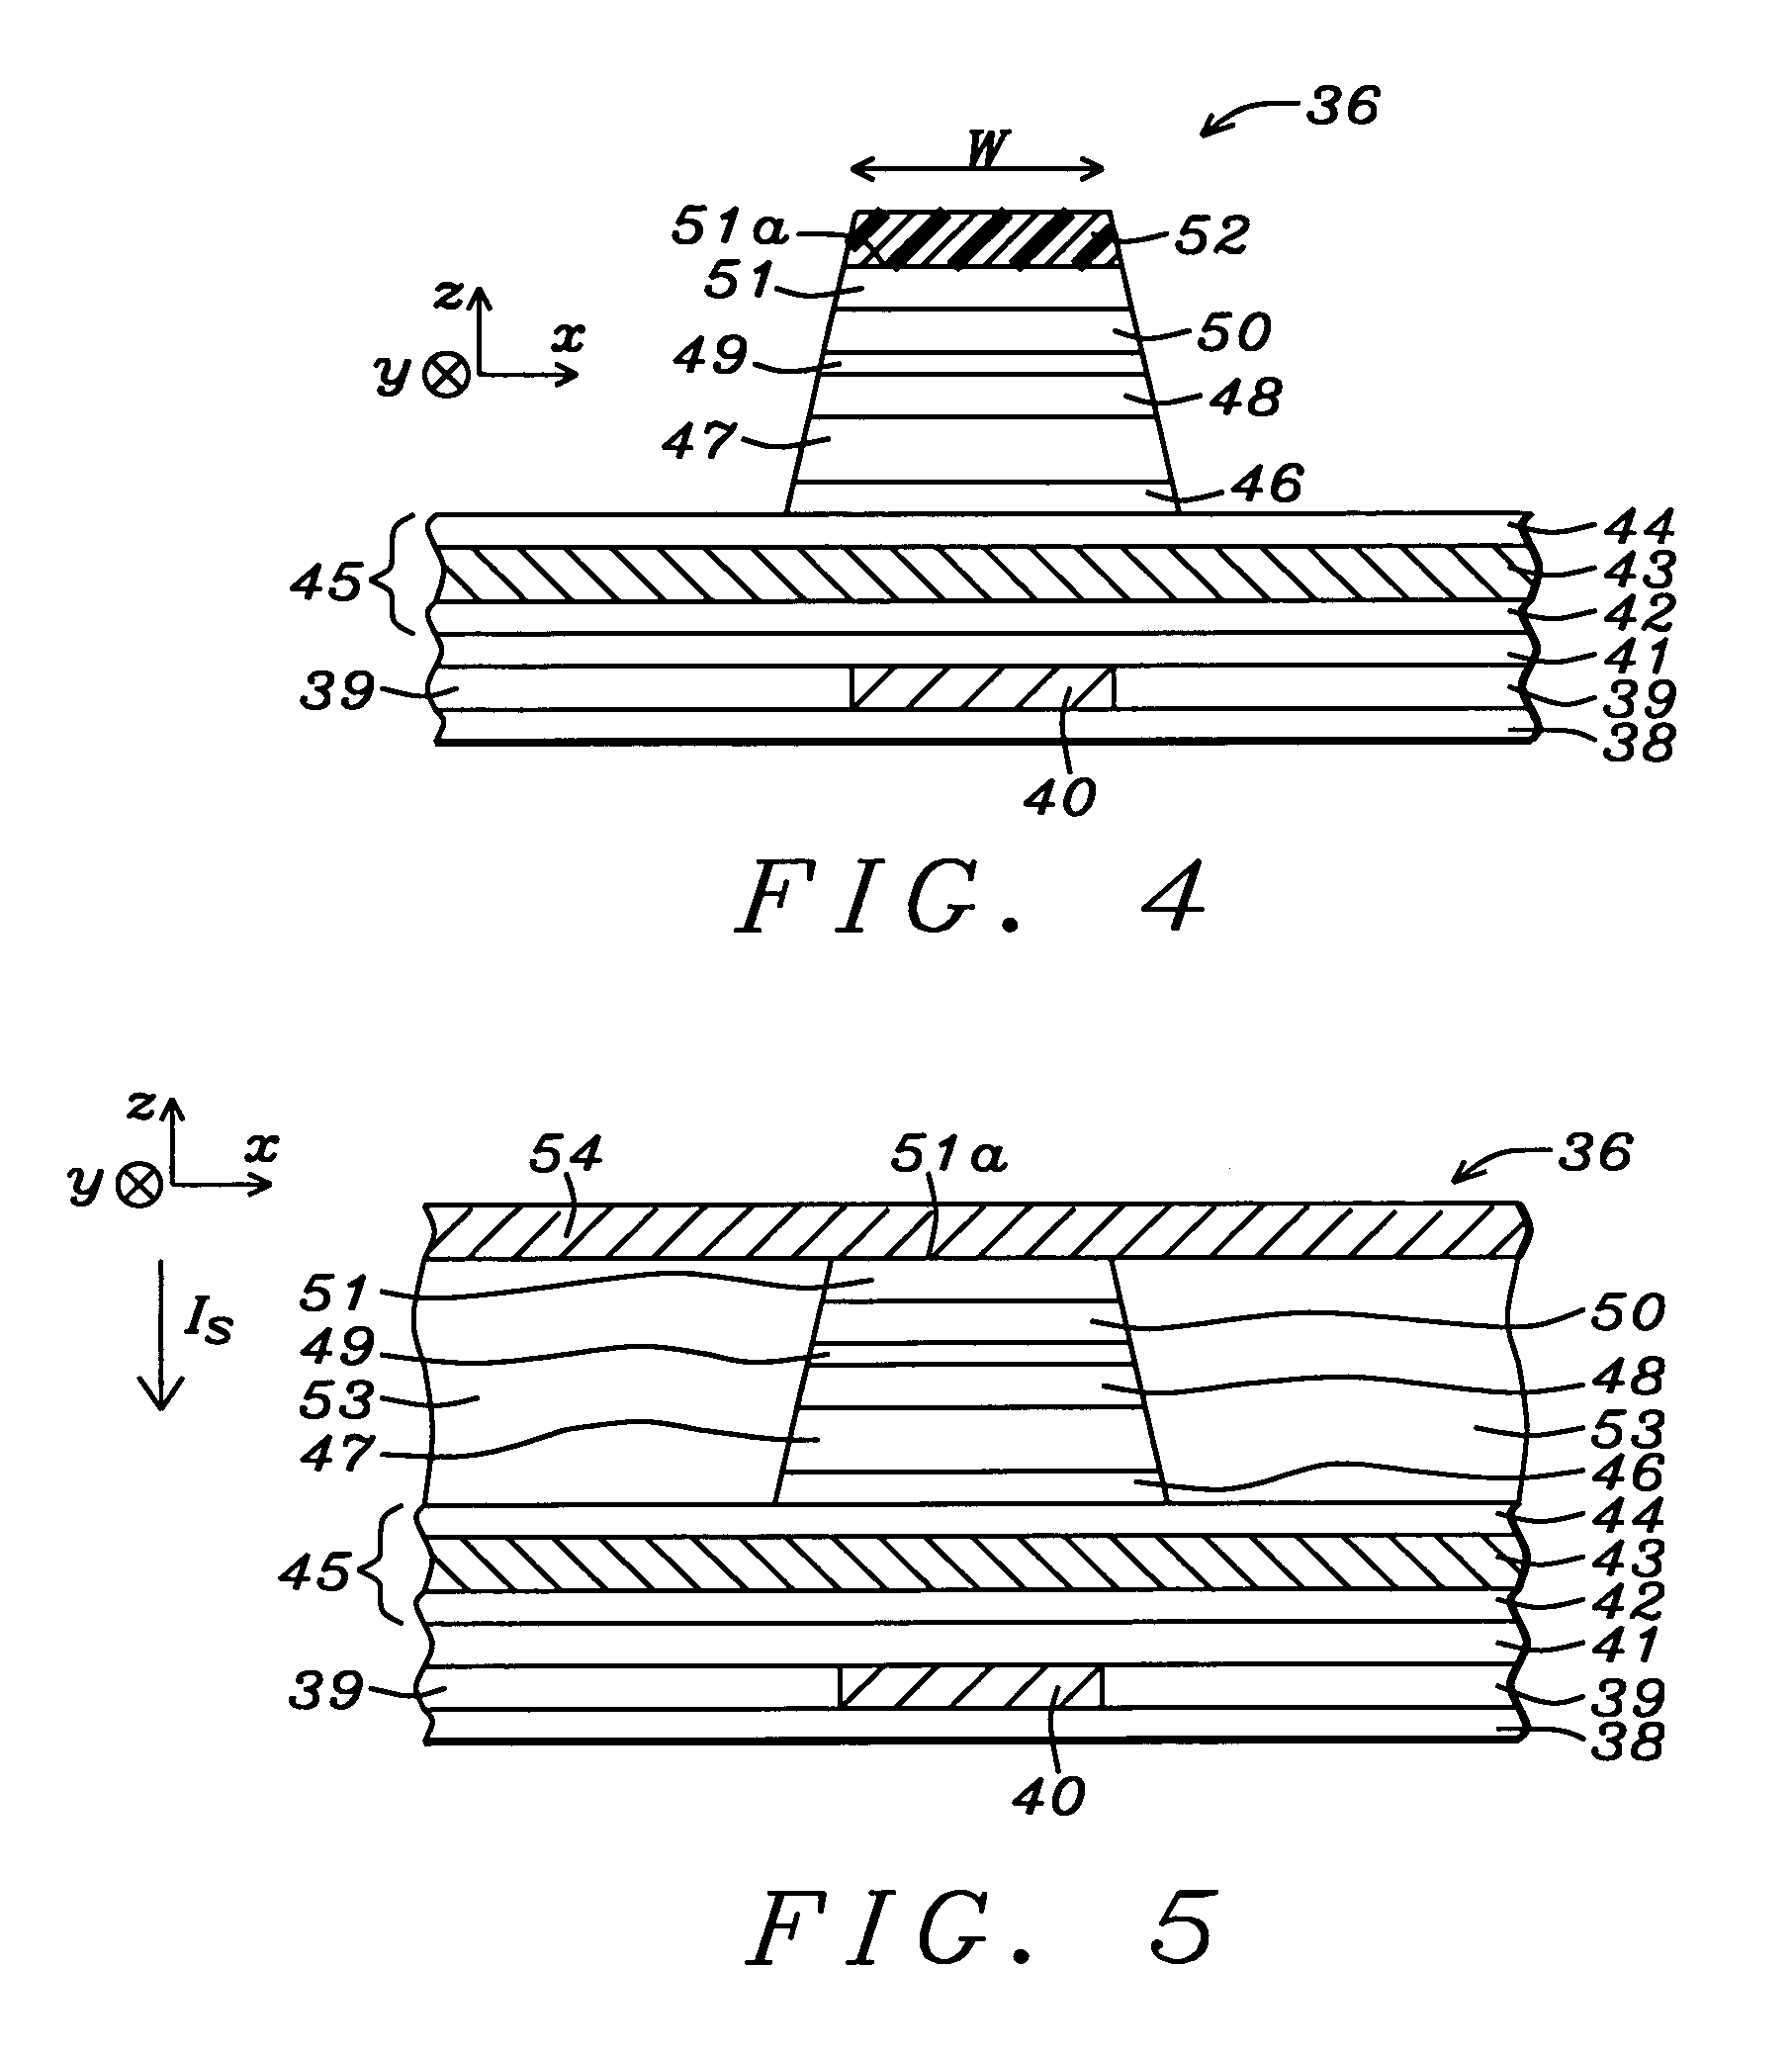 Capping structure for enhancing dR/R of the MTJ device